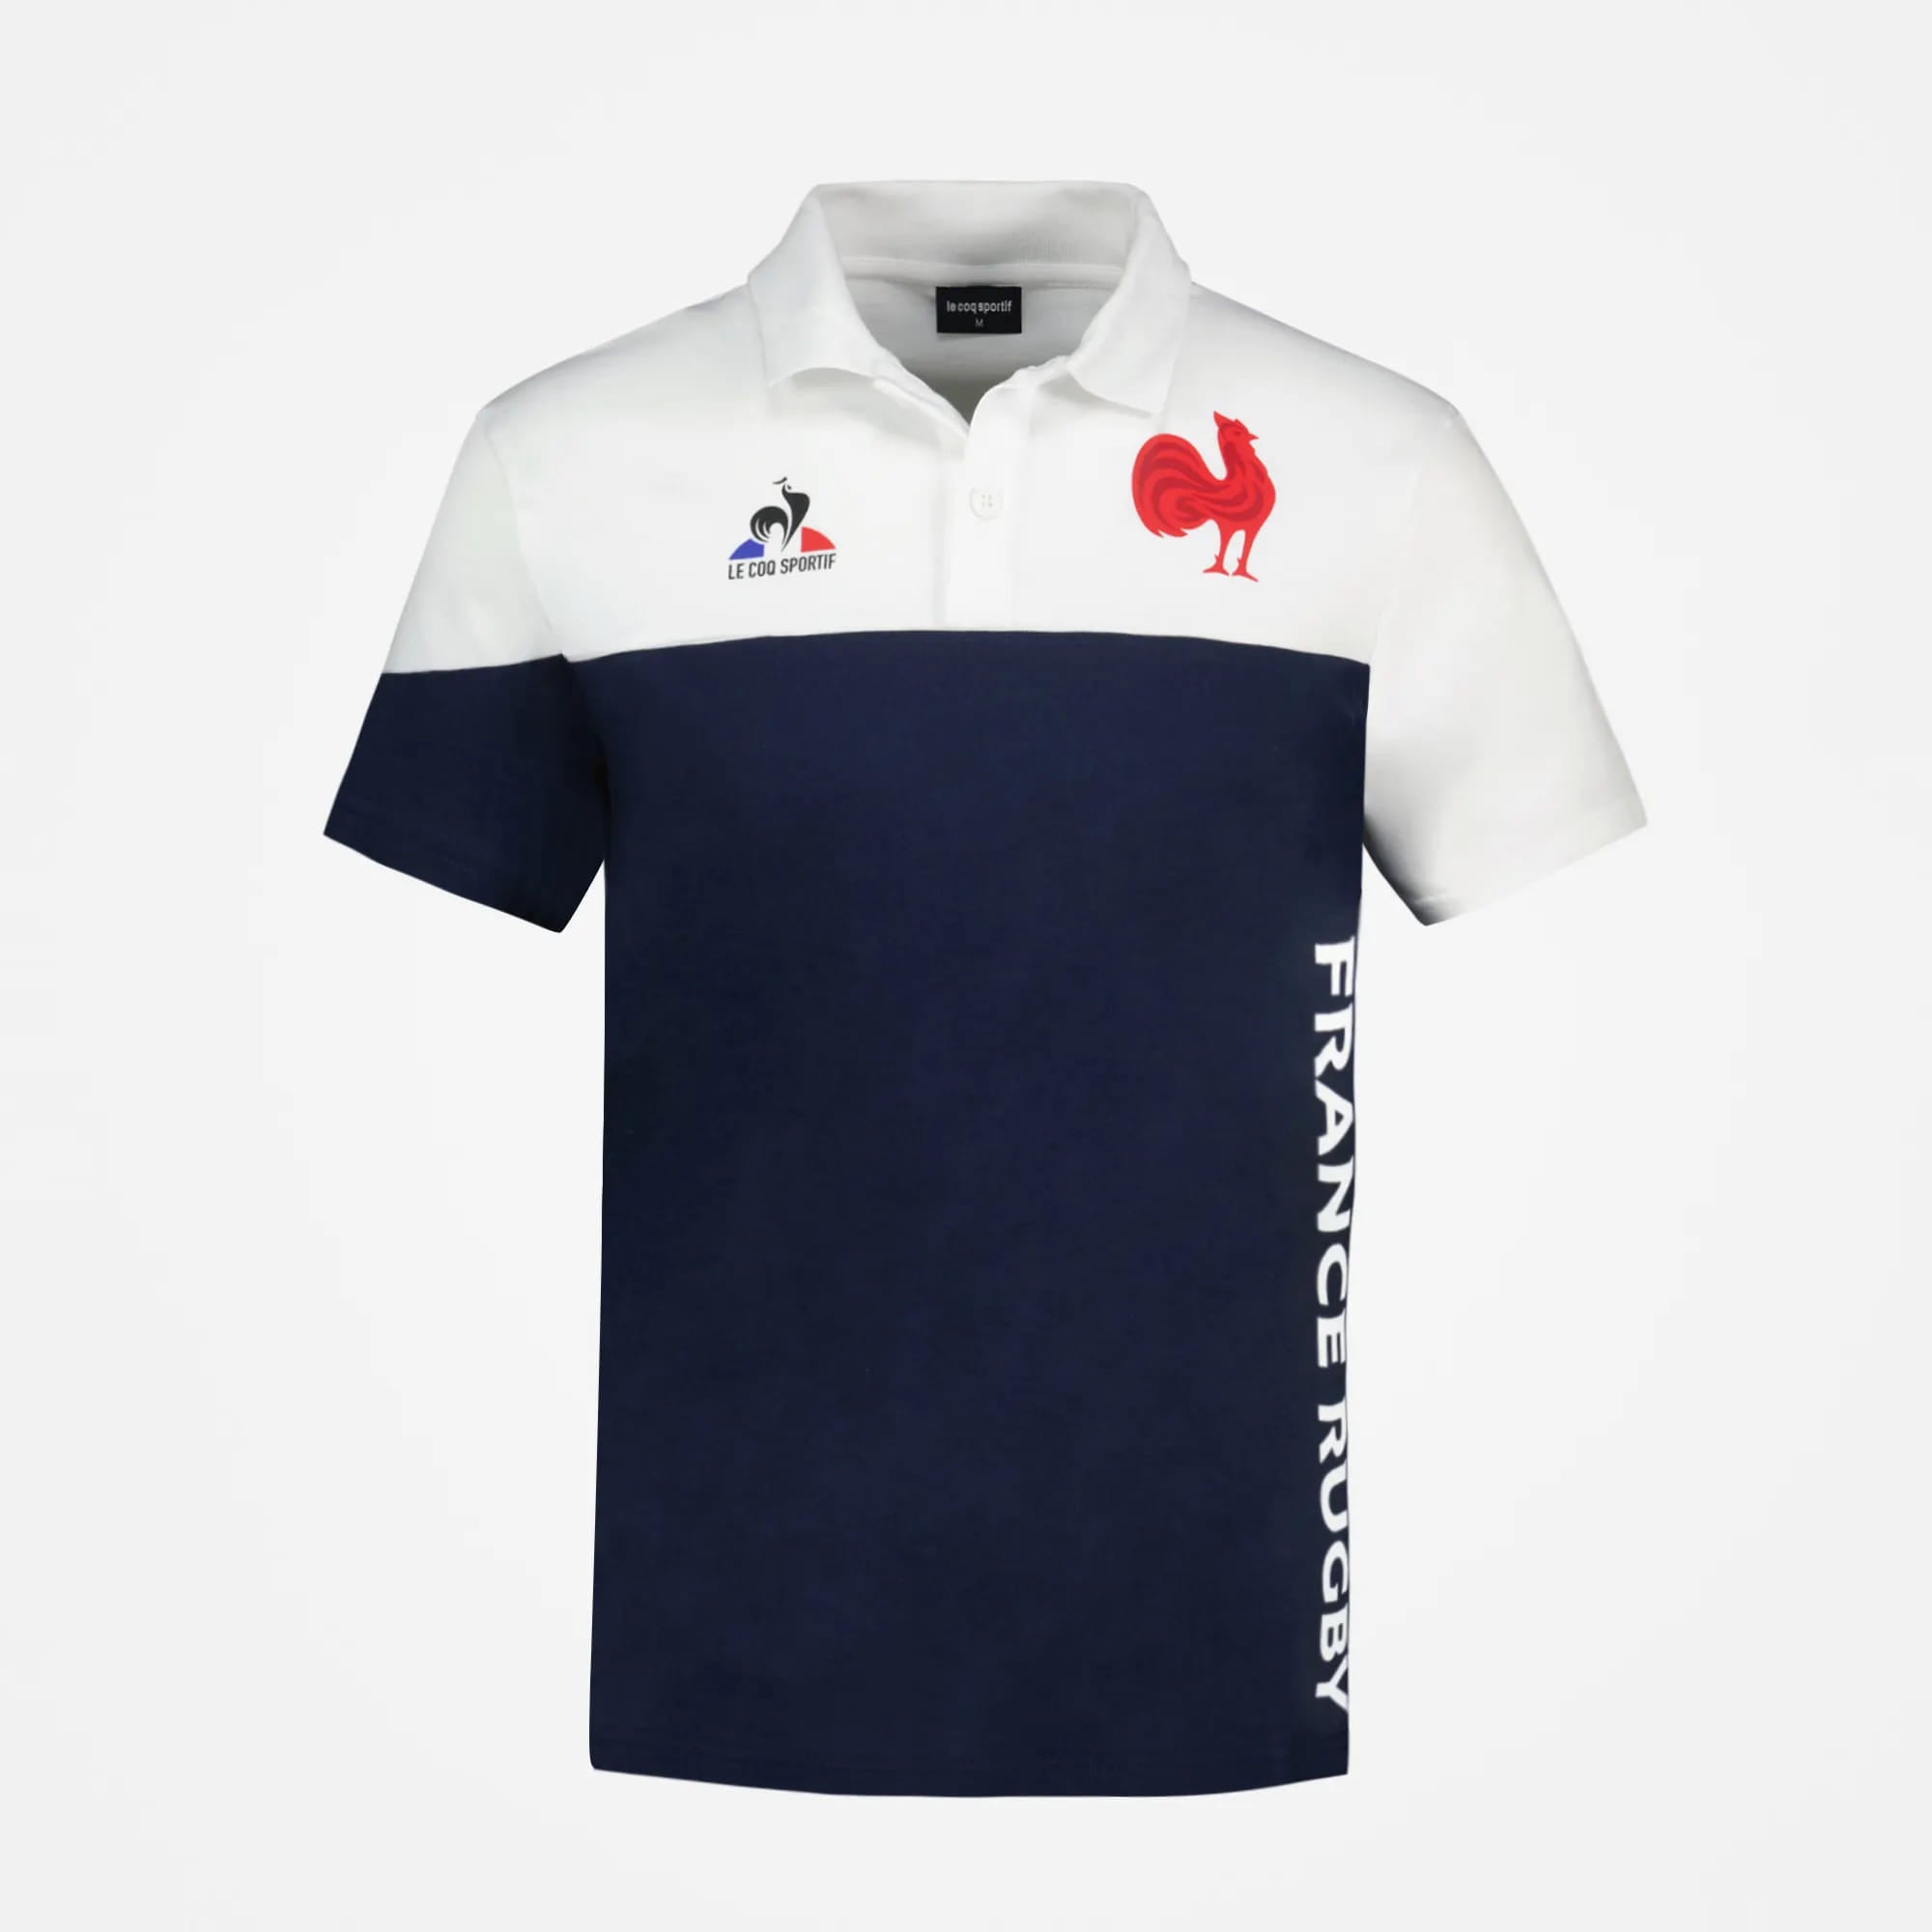 Polo Rugby Francia bicolore Ufficiale Fans